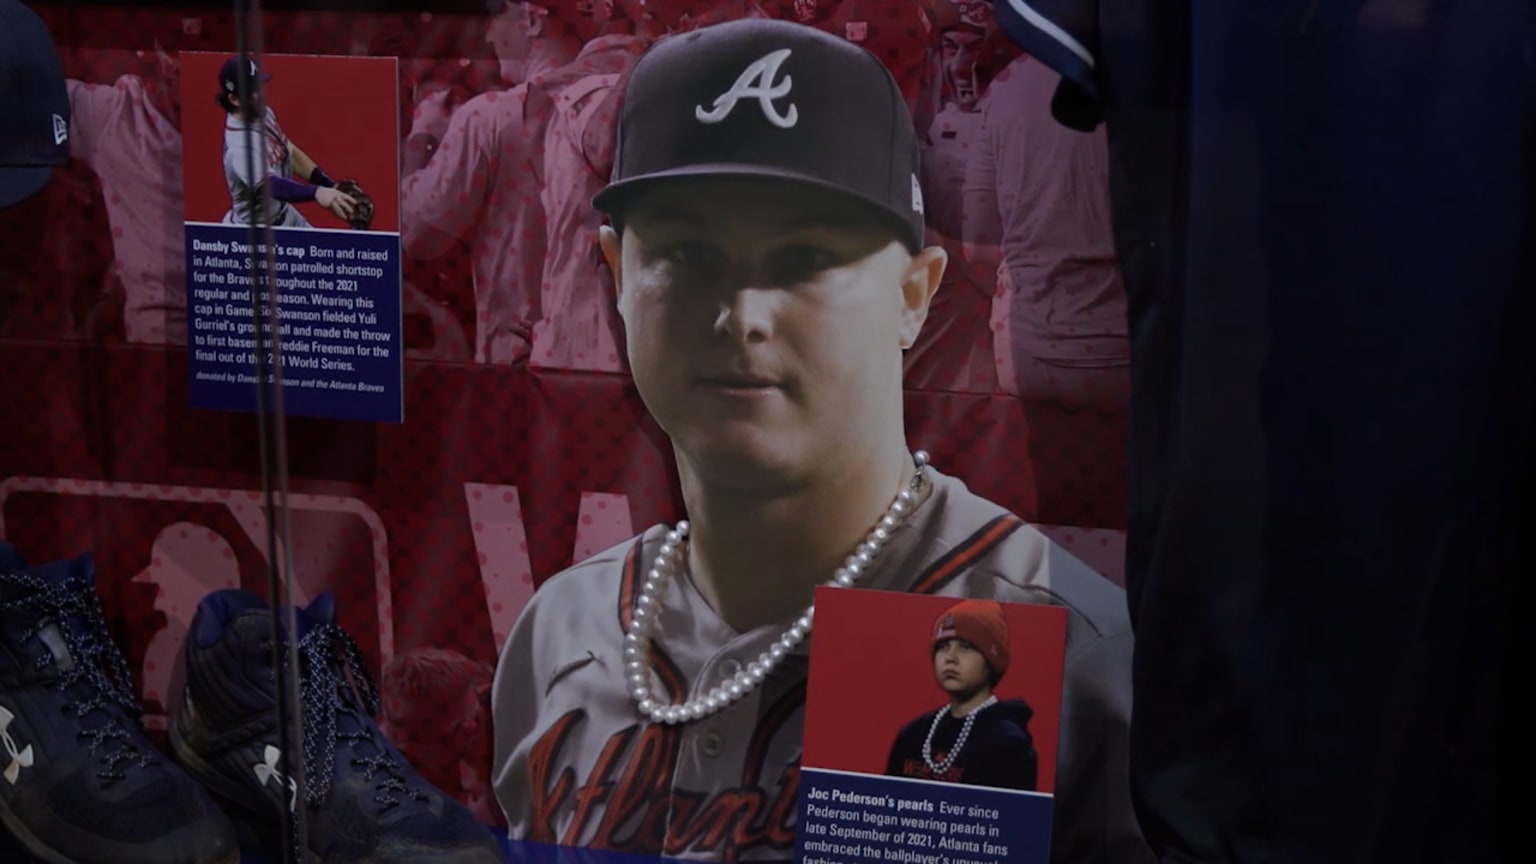 braves player that wears pearls